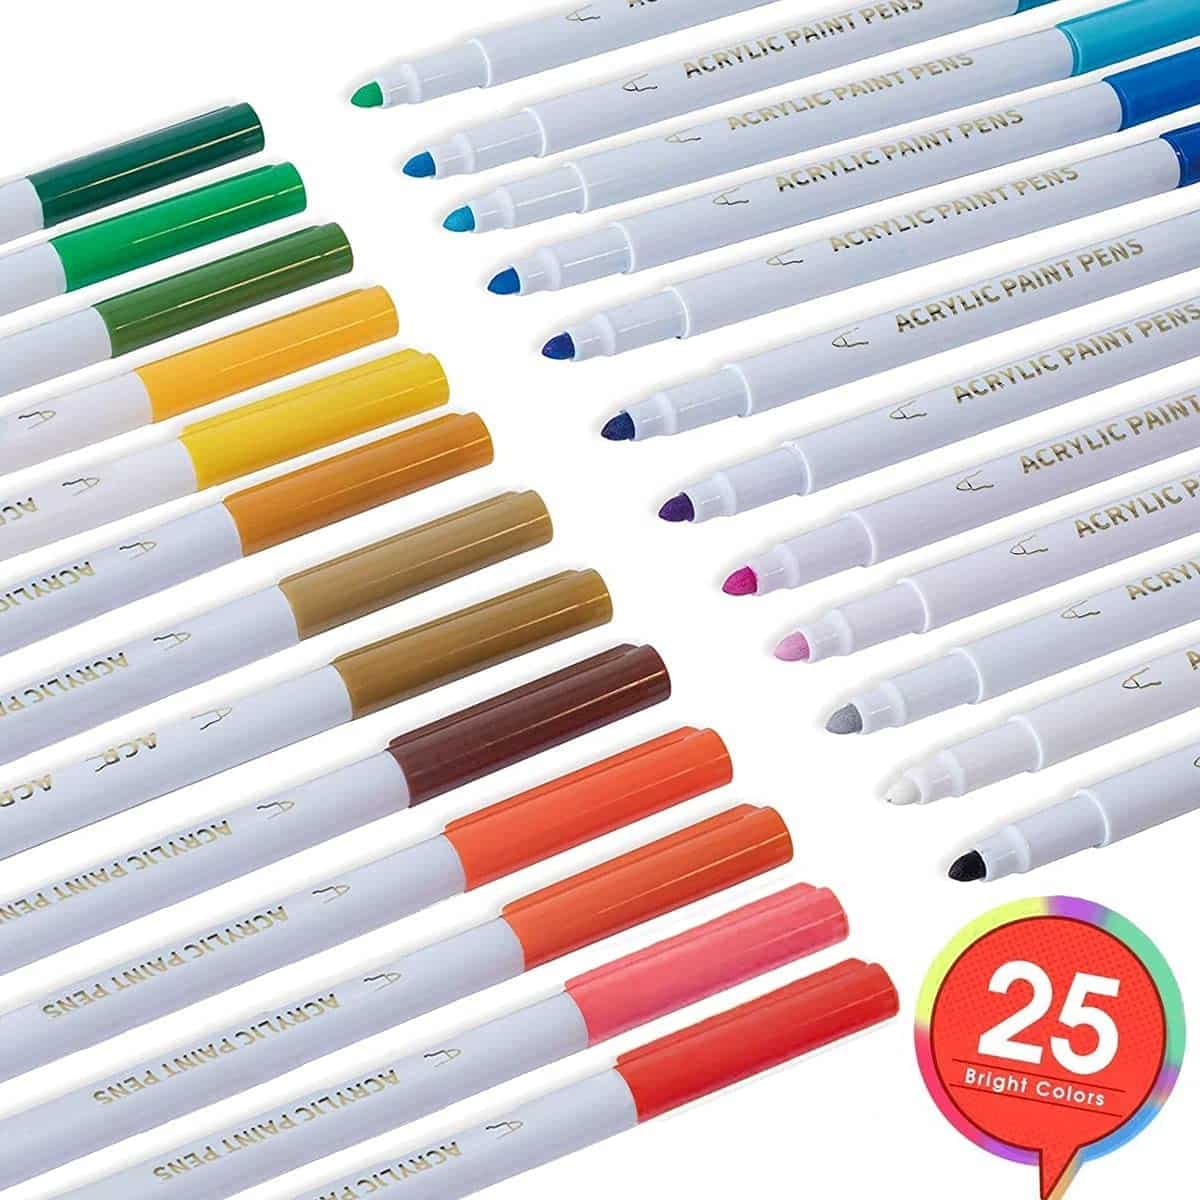 Funnasting Acrylic Pens For Glass painting